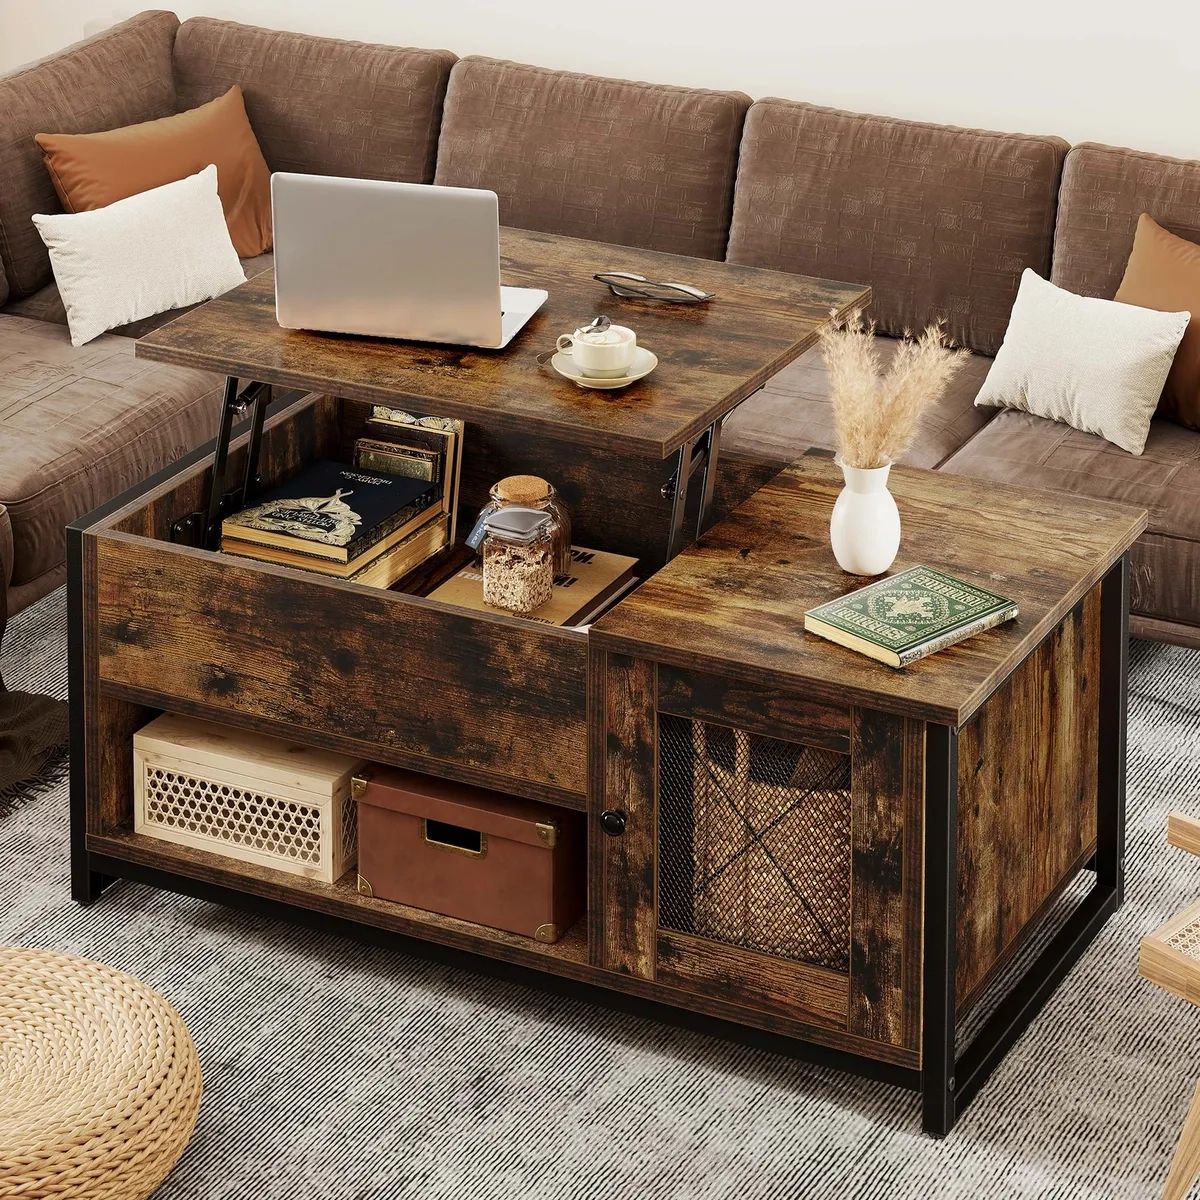 Farmhouse Lift Top Coffee Table With Hidden Compartment And Storage Shelf  Brown | Ebay Pertaining To Lift Top Coffee Tables With Shelves (View 10 of 15)